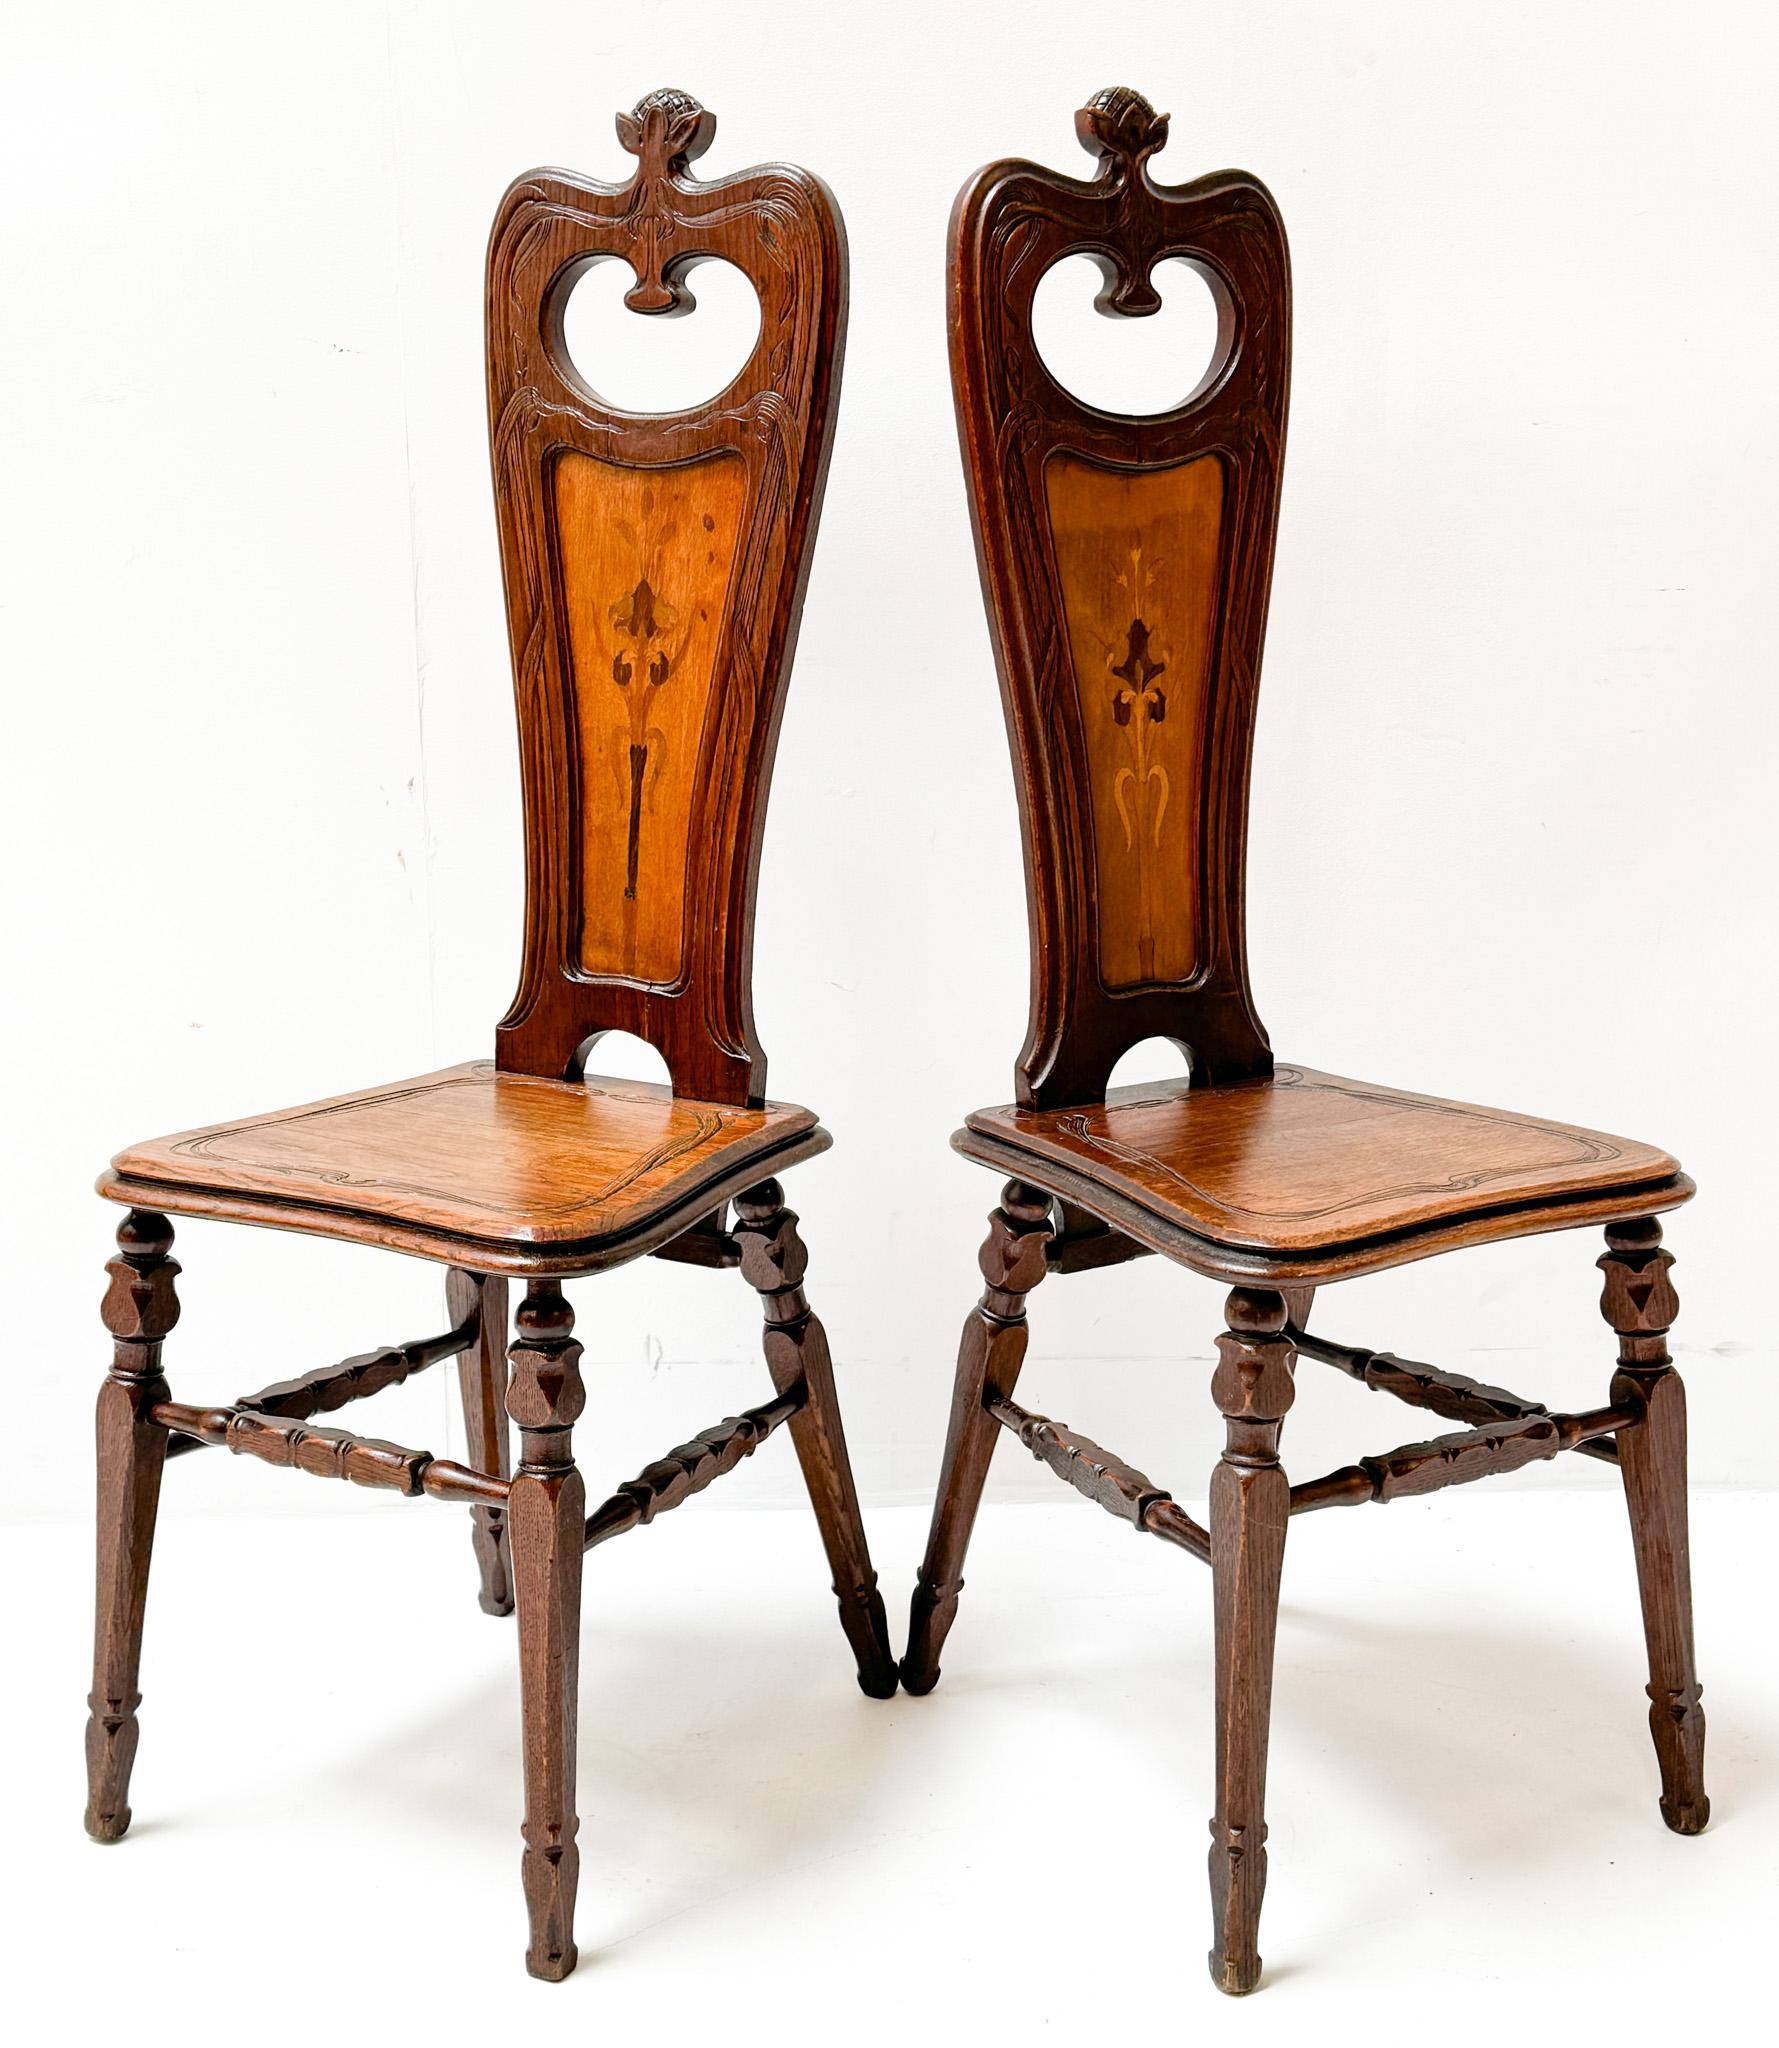 Magnificent and rare pair of Art Nouveau side chairs.
Design by Emile Gallé.
Striking French design from the 1890s.
Solid oak frames with original sycamore decorations of flowers in the backsides.
This wonderful pair of Art Nouveau side chairs by